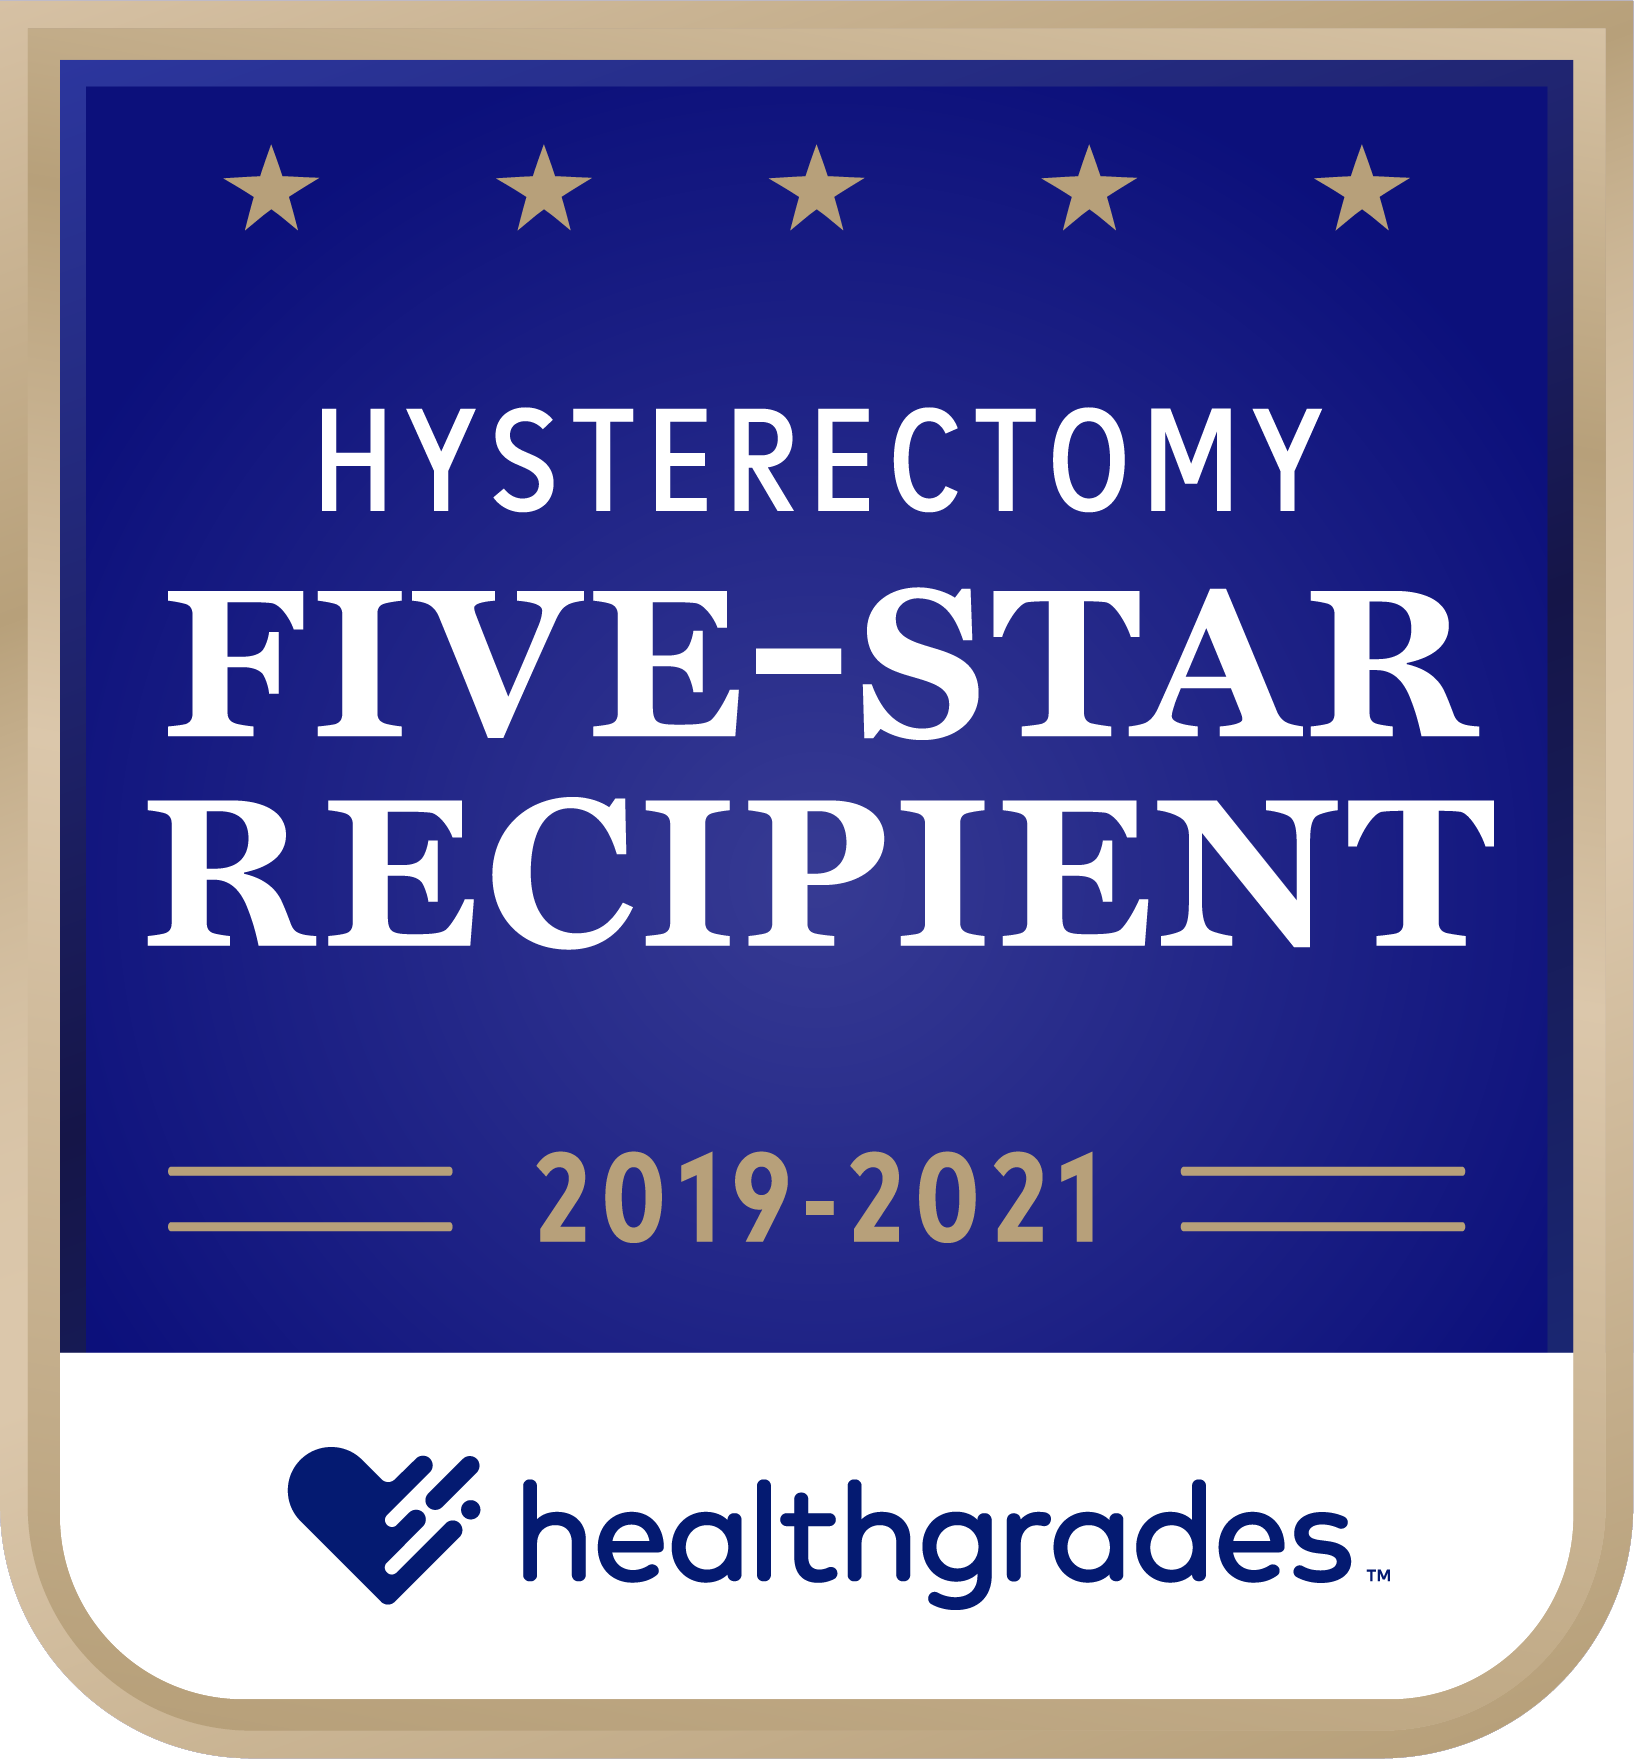 Five-Star Recipient for Hysterectomy for 3 Years in a Row (2019-2021)